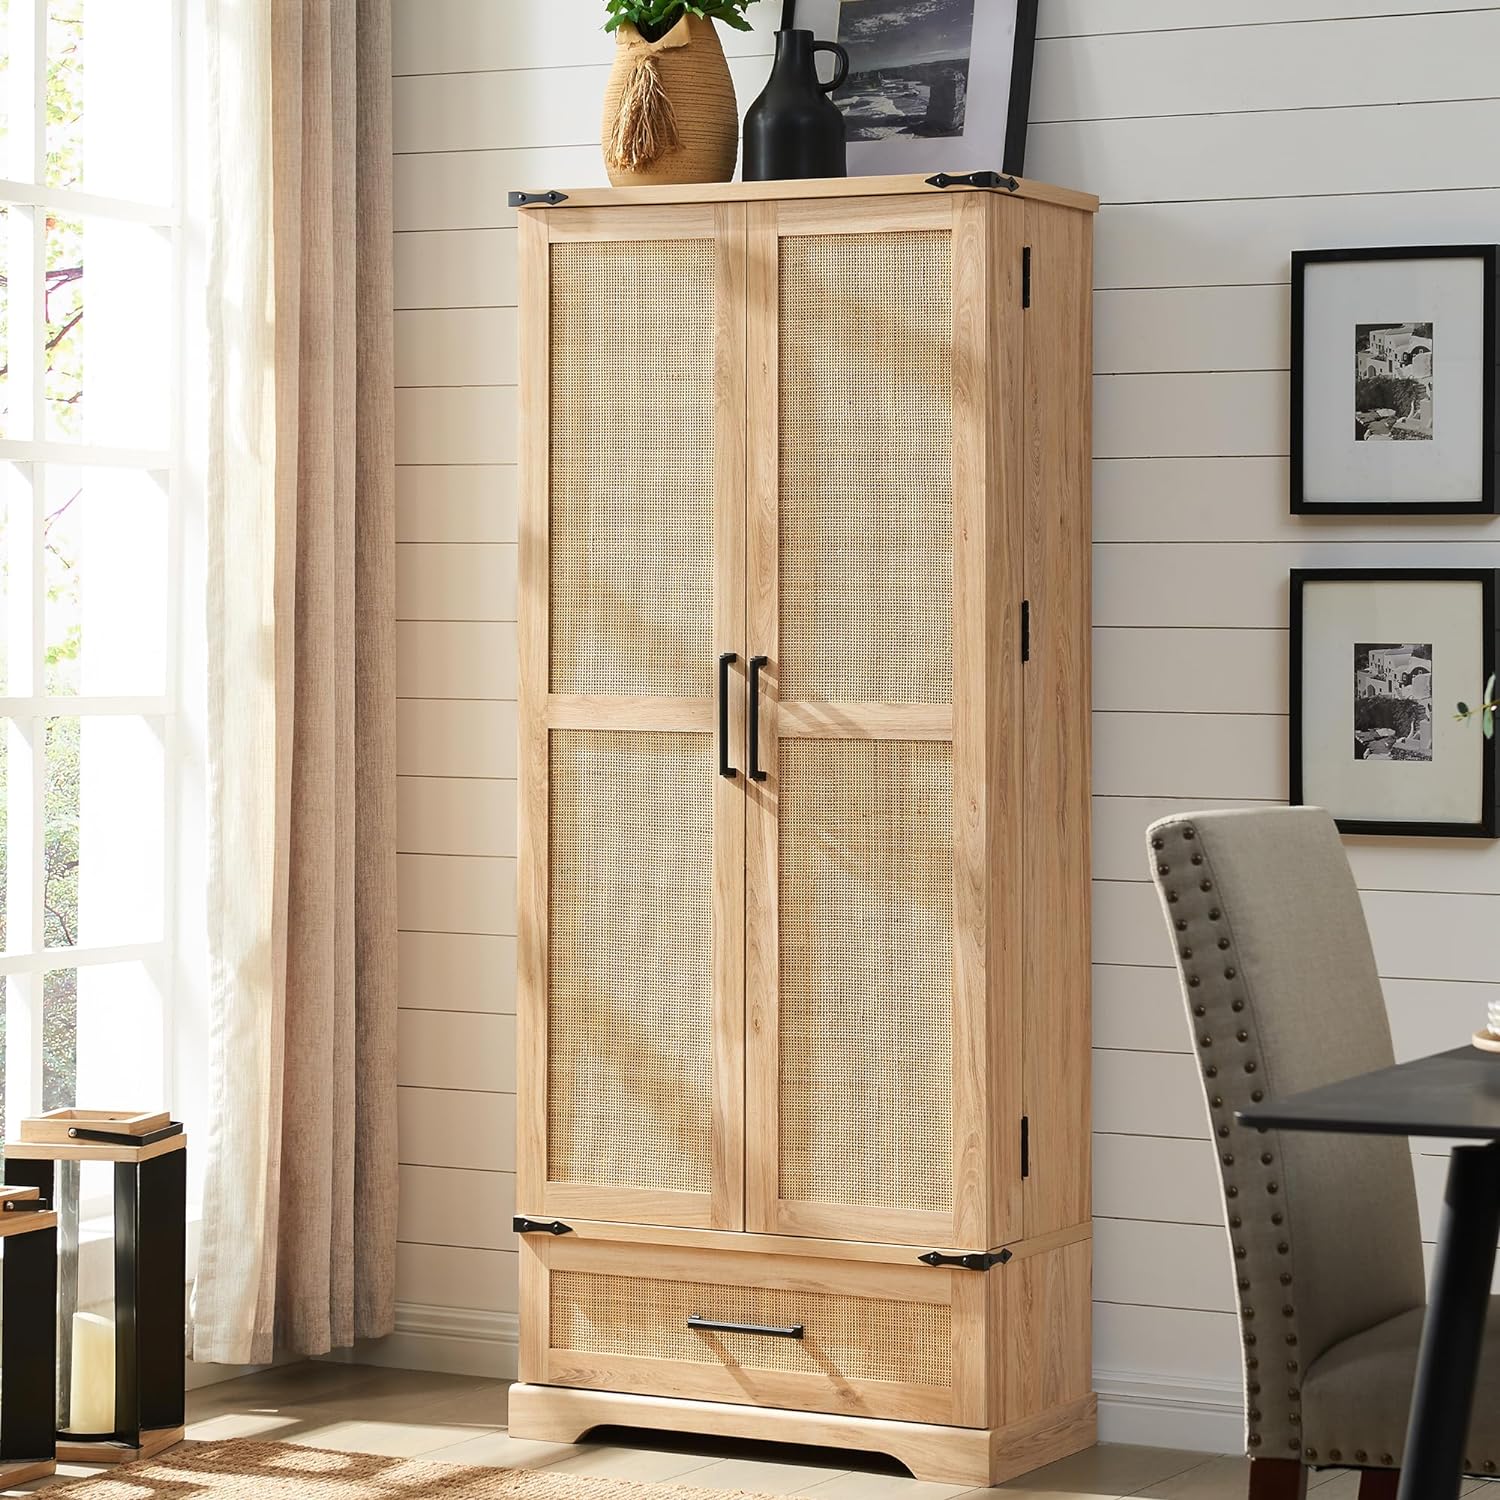 72 Tall Rattan Kitchen Pantry Cabinet with Drawer, Boho Storage Cabinet with 2 Rattan Doors and Shelves, Versatile Large Cabinet for Dining Room, Bathroom, Living Room, Laudry, Natural Oak